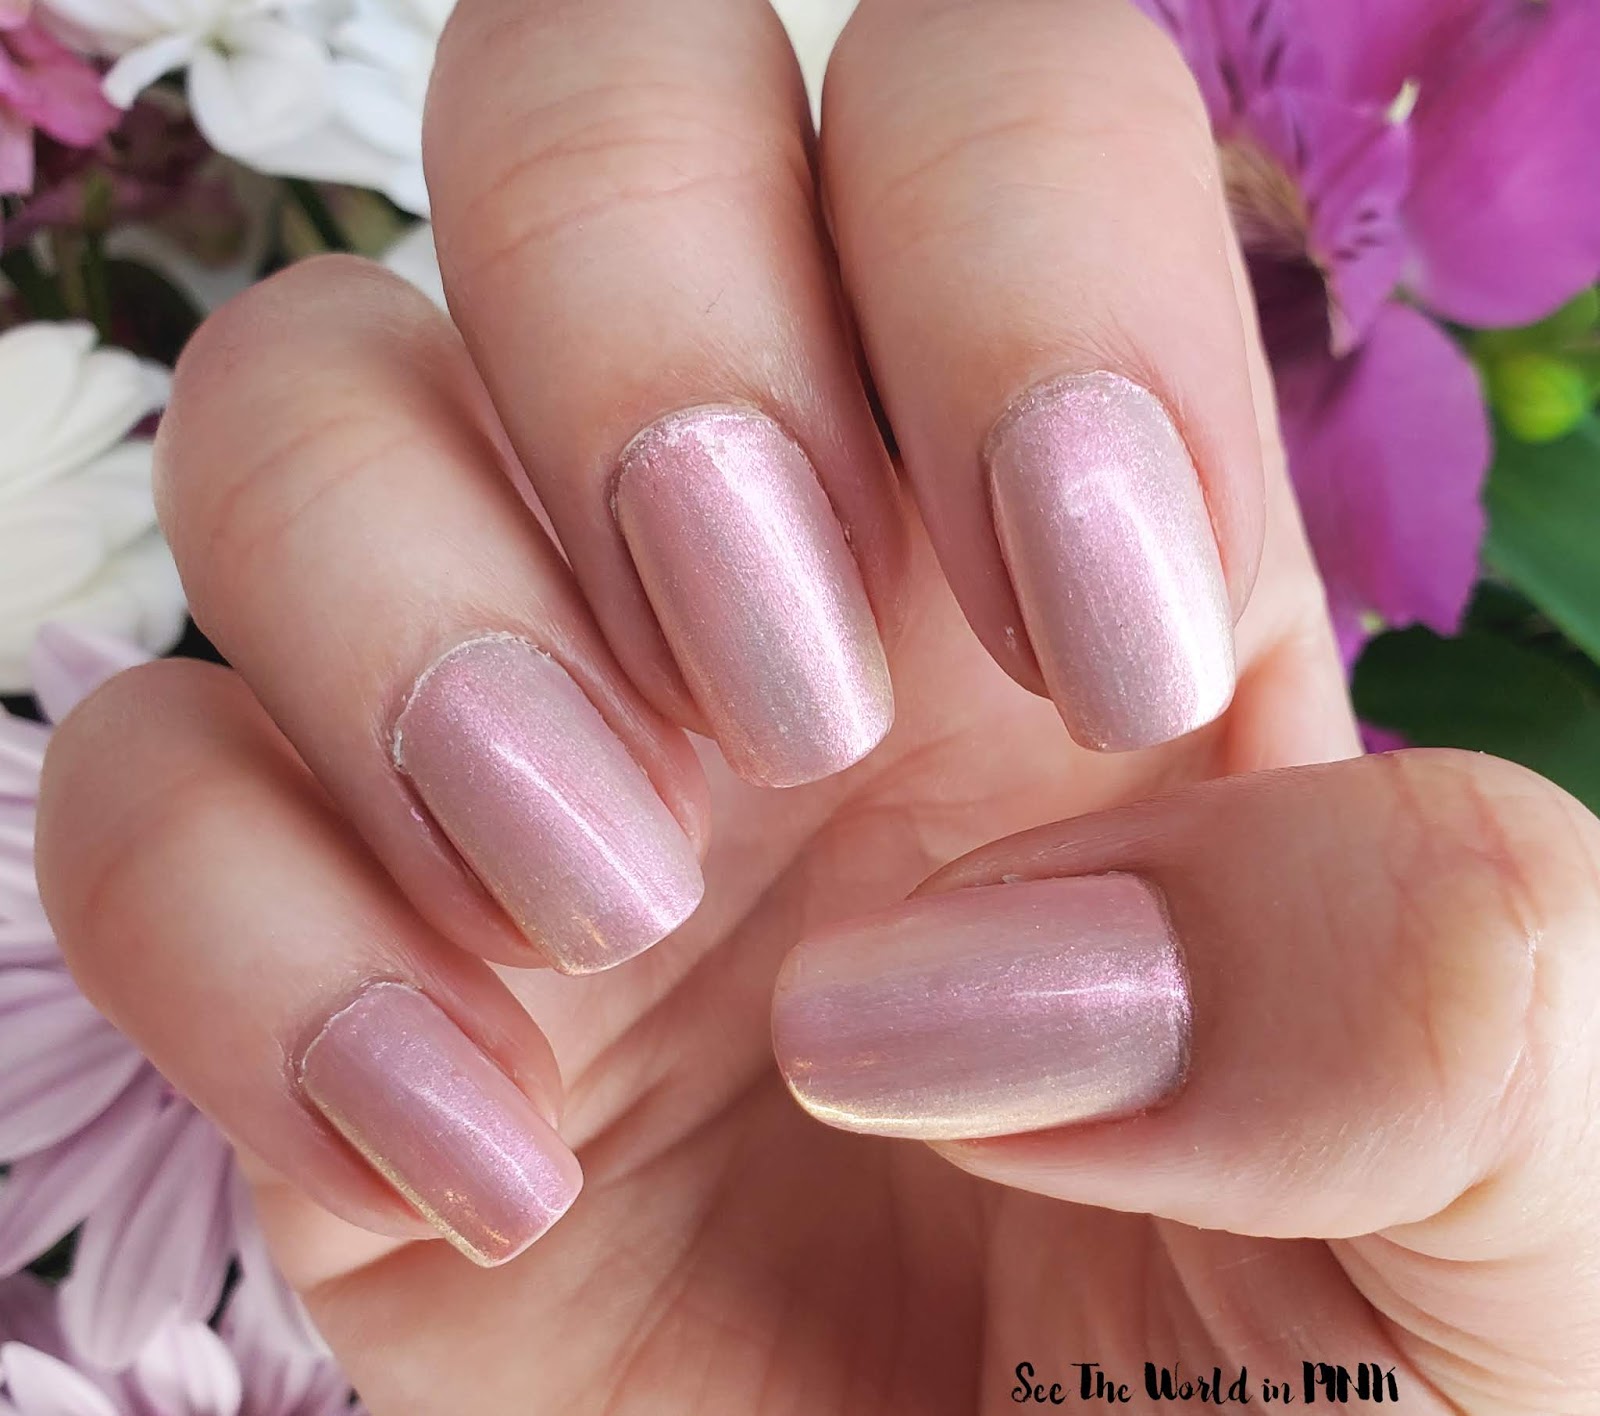 How to make your own nailpolish - twindly beauty blog